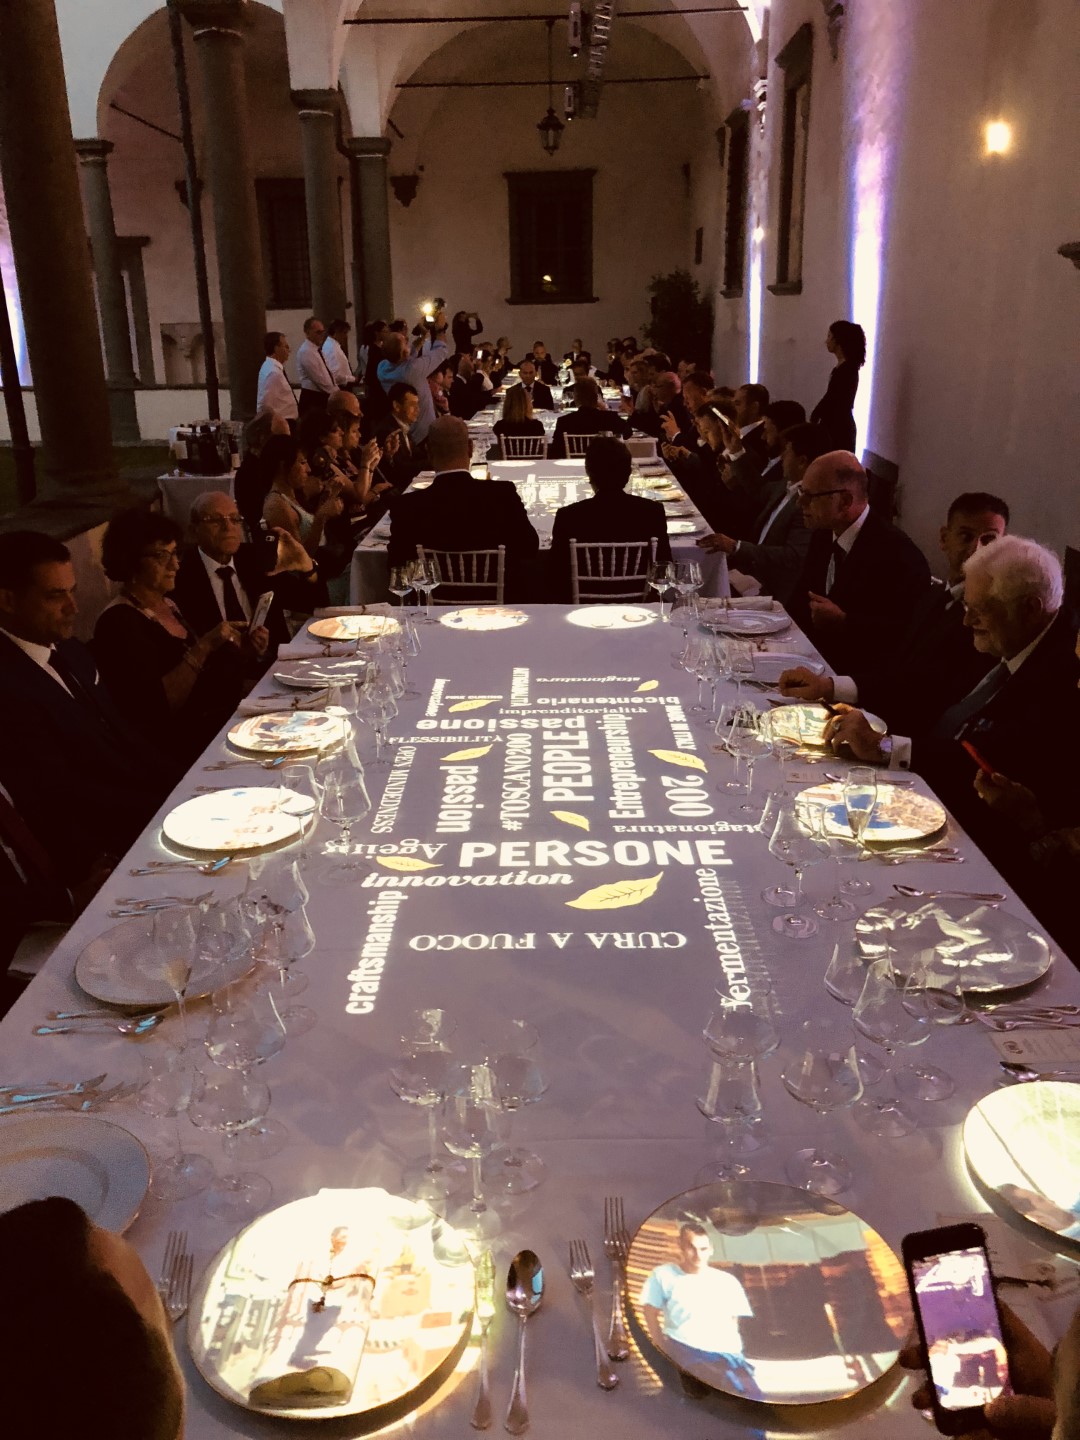 Manifatture Sigaro Toscano 2018 – Lucca – Incentive Tour, Gala Dinner (Chef Cristiano Tomei) con table mapping e Jazz session.